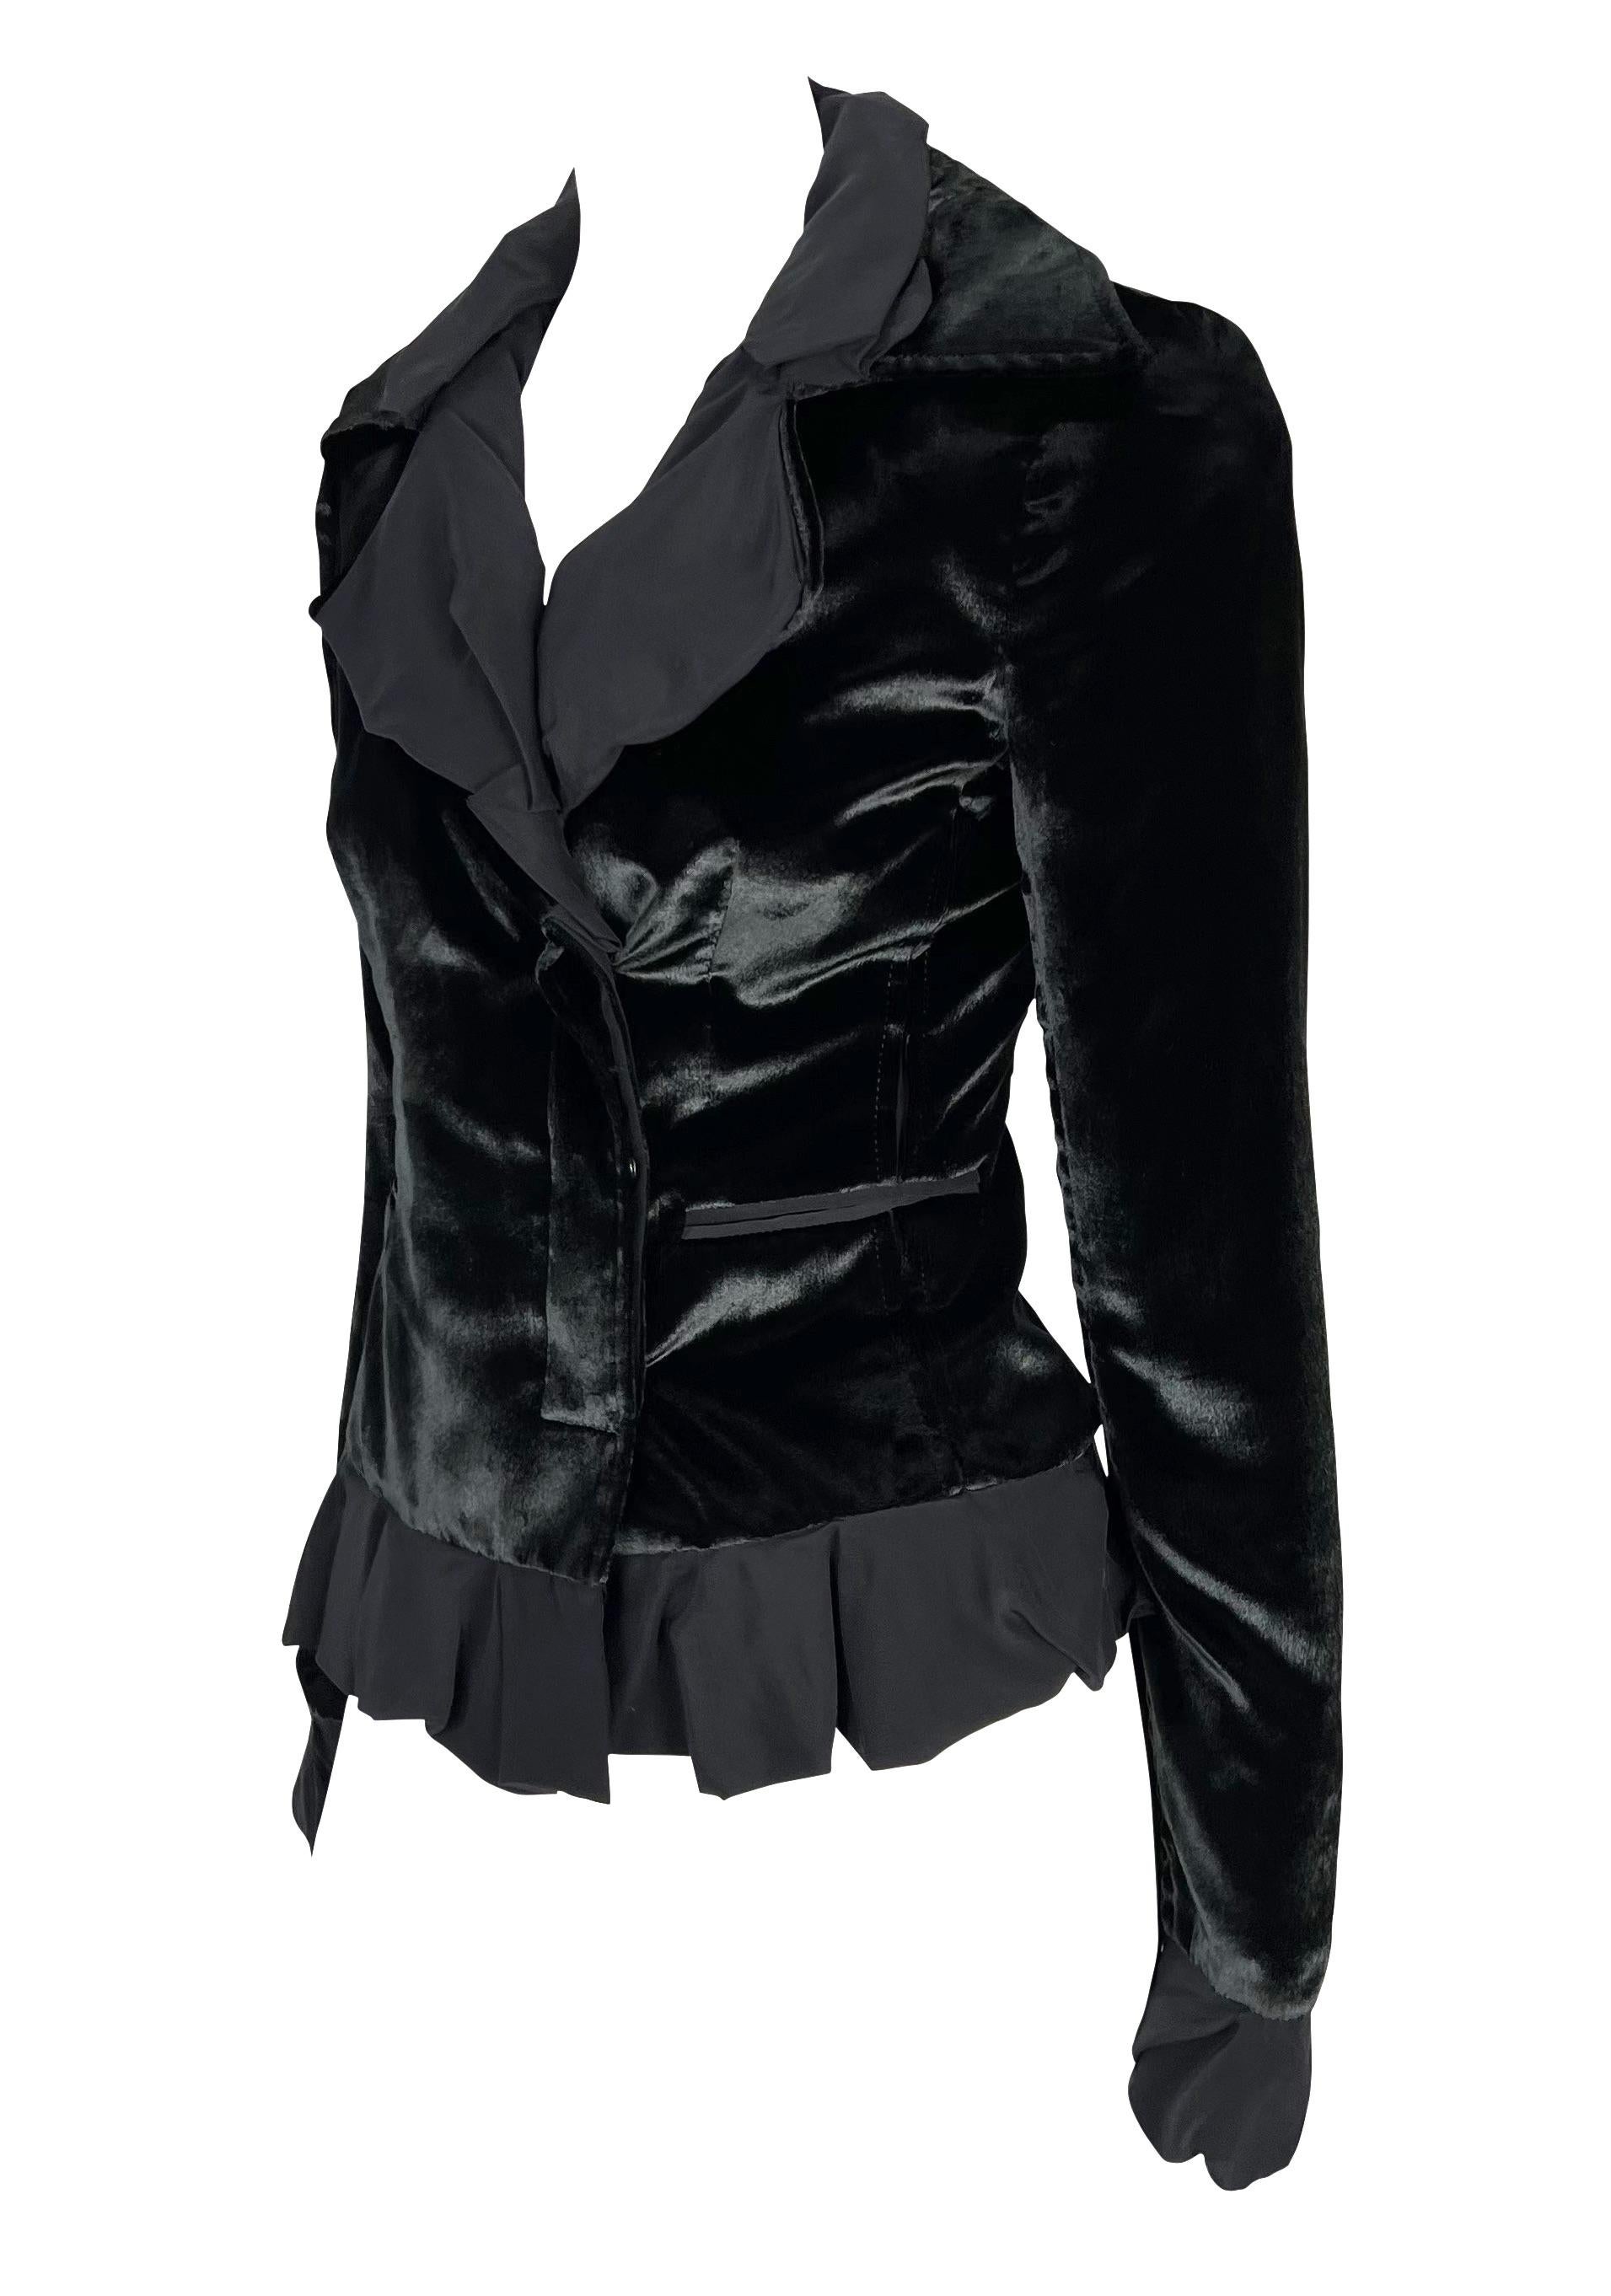 Presenting a beautiful black velvet Yves Saint Laurent blazer, designed by Tom Ford. From the Fall/Winter 2002 collection, this beautiful blazer is constructed of shimmery black velvet and features chiffon ruffle details at the hem, collar, and